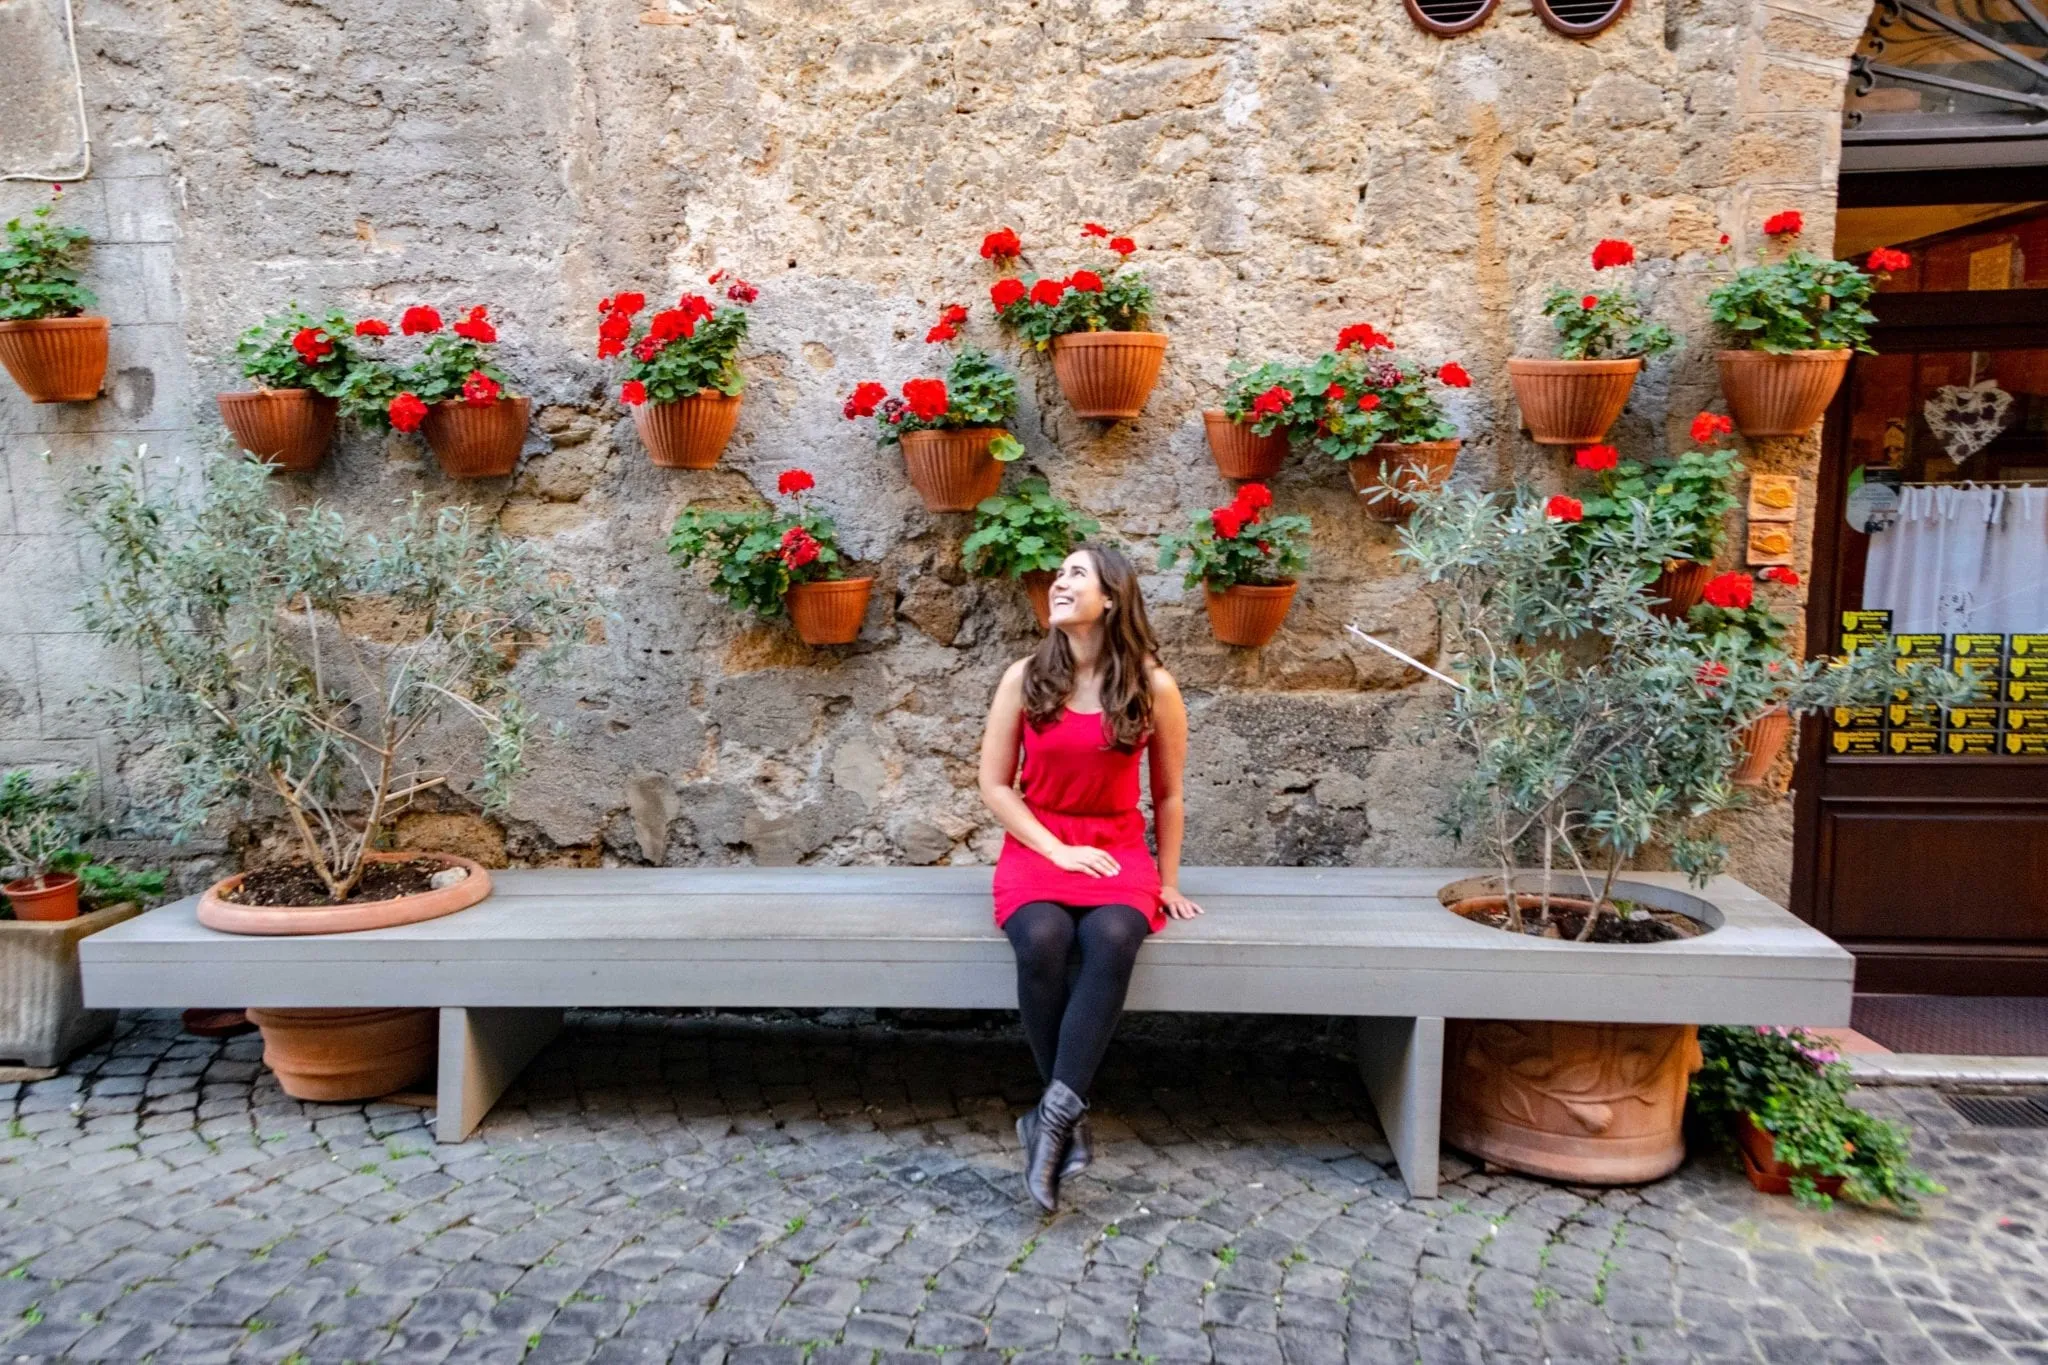 Kate Storm sitting on a bench in Orvieto Italy. She's wearing a red dress, black tights, and black boots. There are red flowers in pots on the wall behind her.